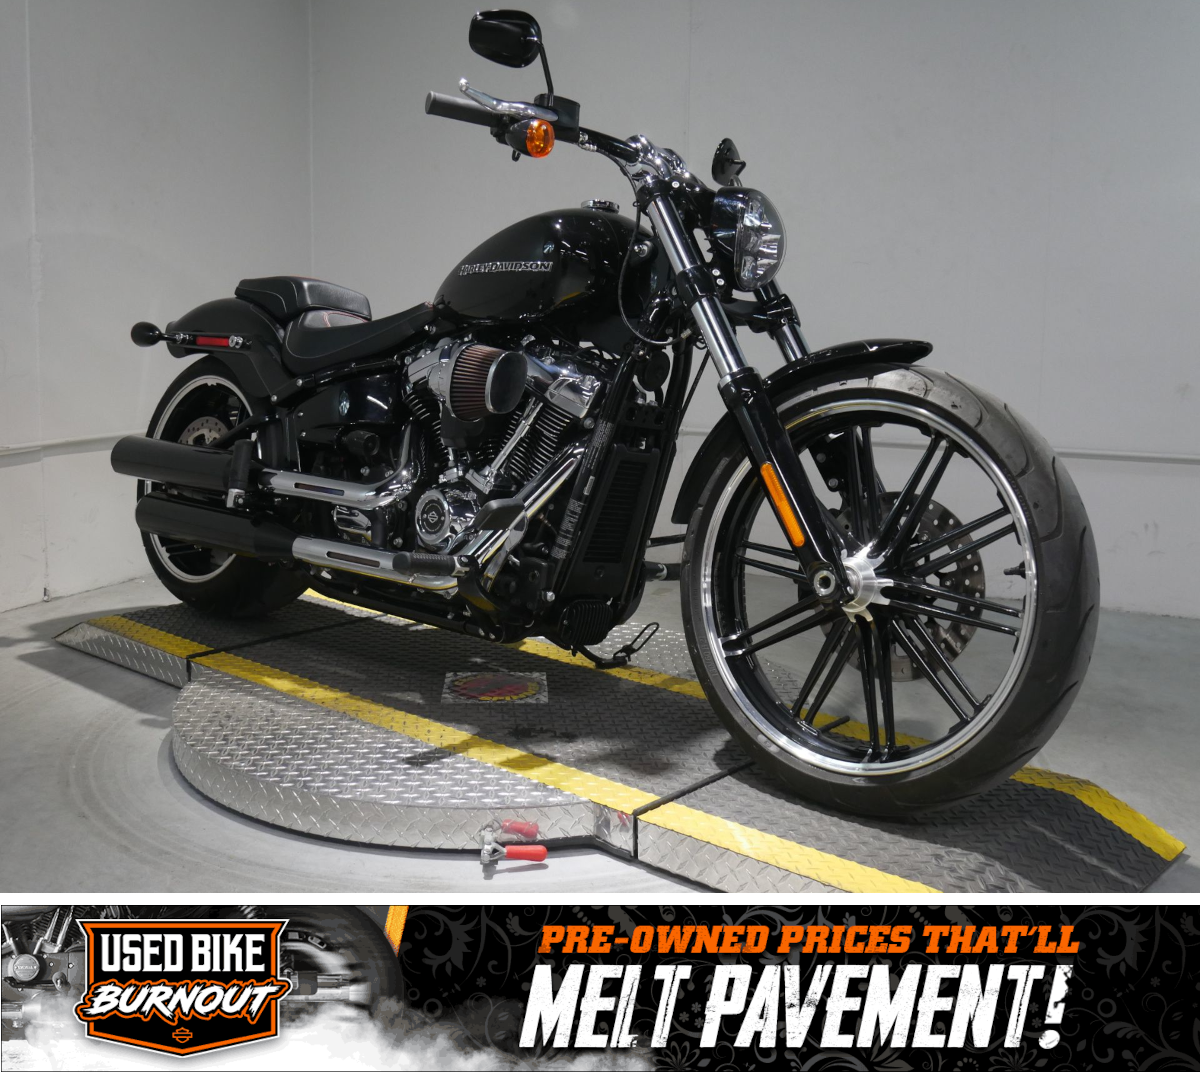 Used 2018 Harley Davidson Breakout 107 Vivid Black Motorcycles In Dubuque Ia 073372